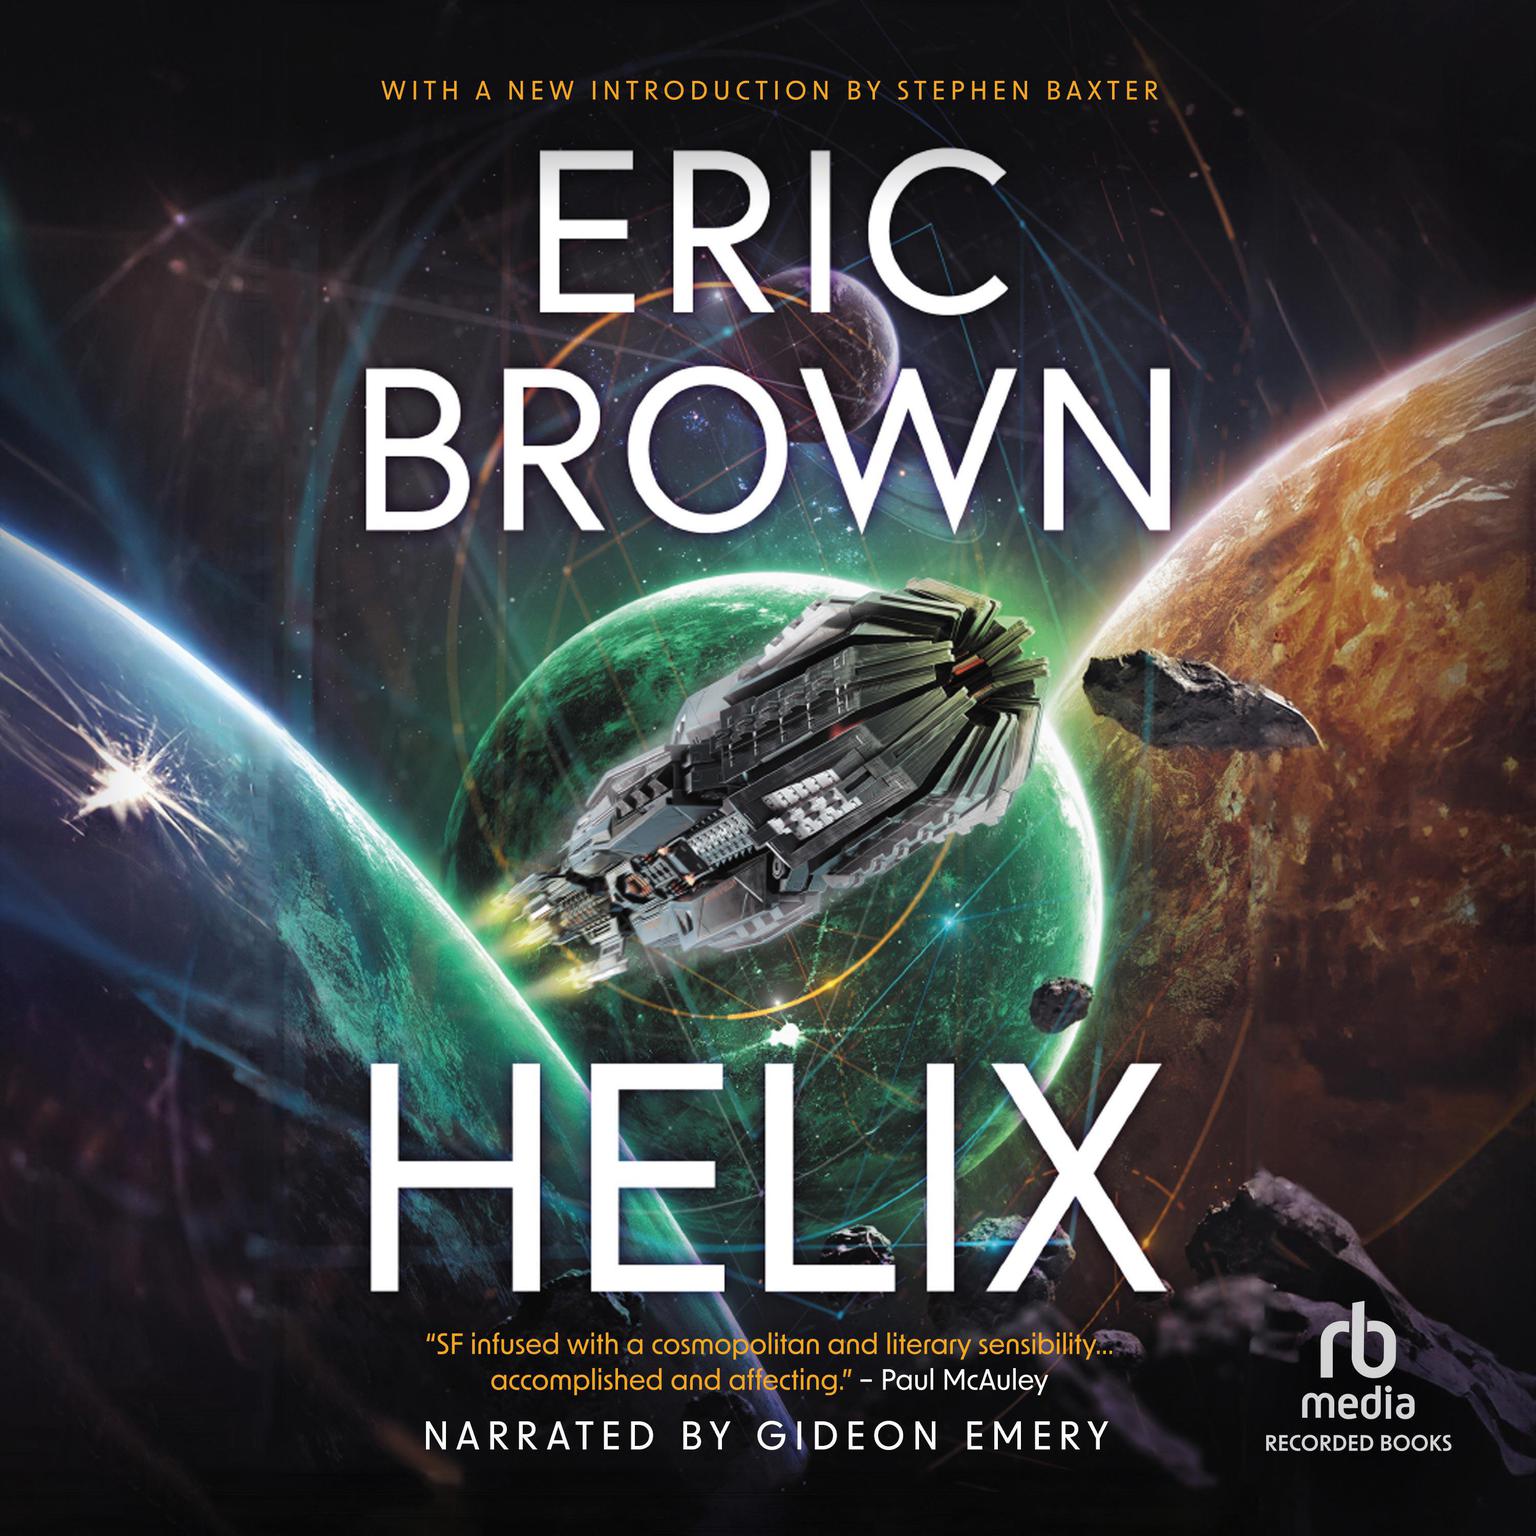 Helix Audiobook, by Eric Brown